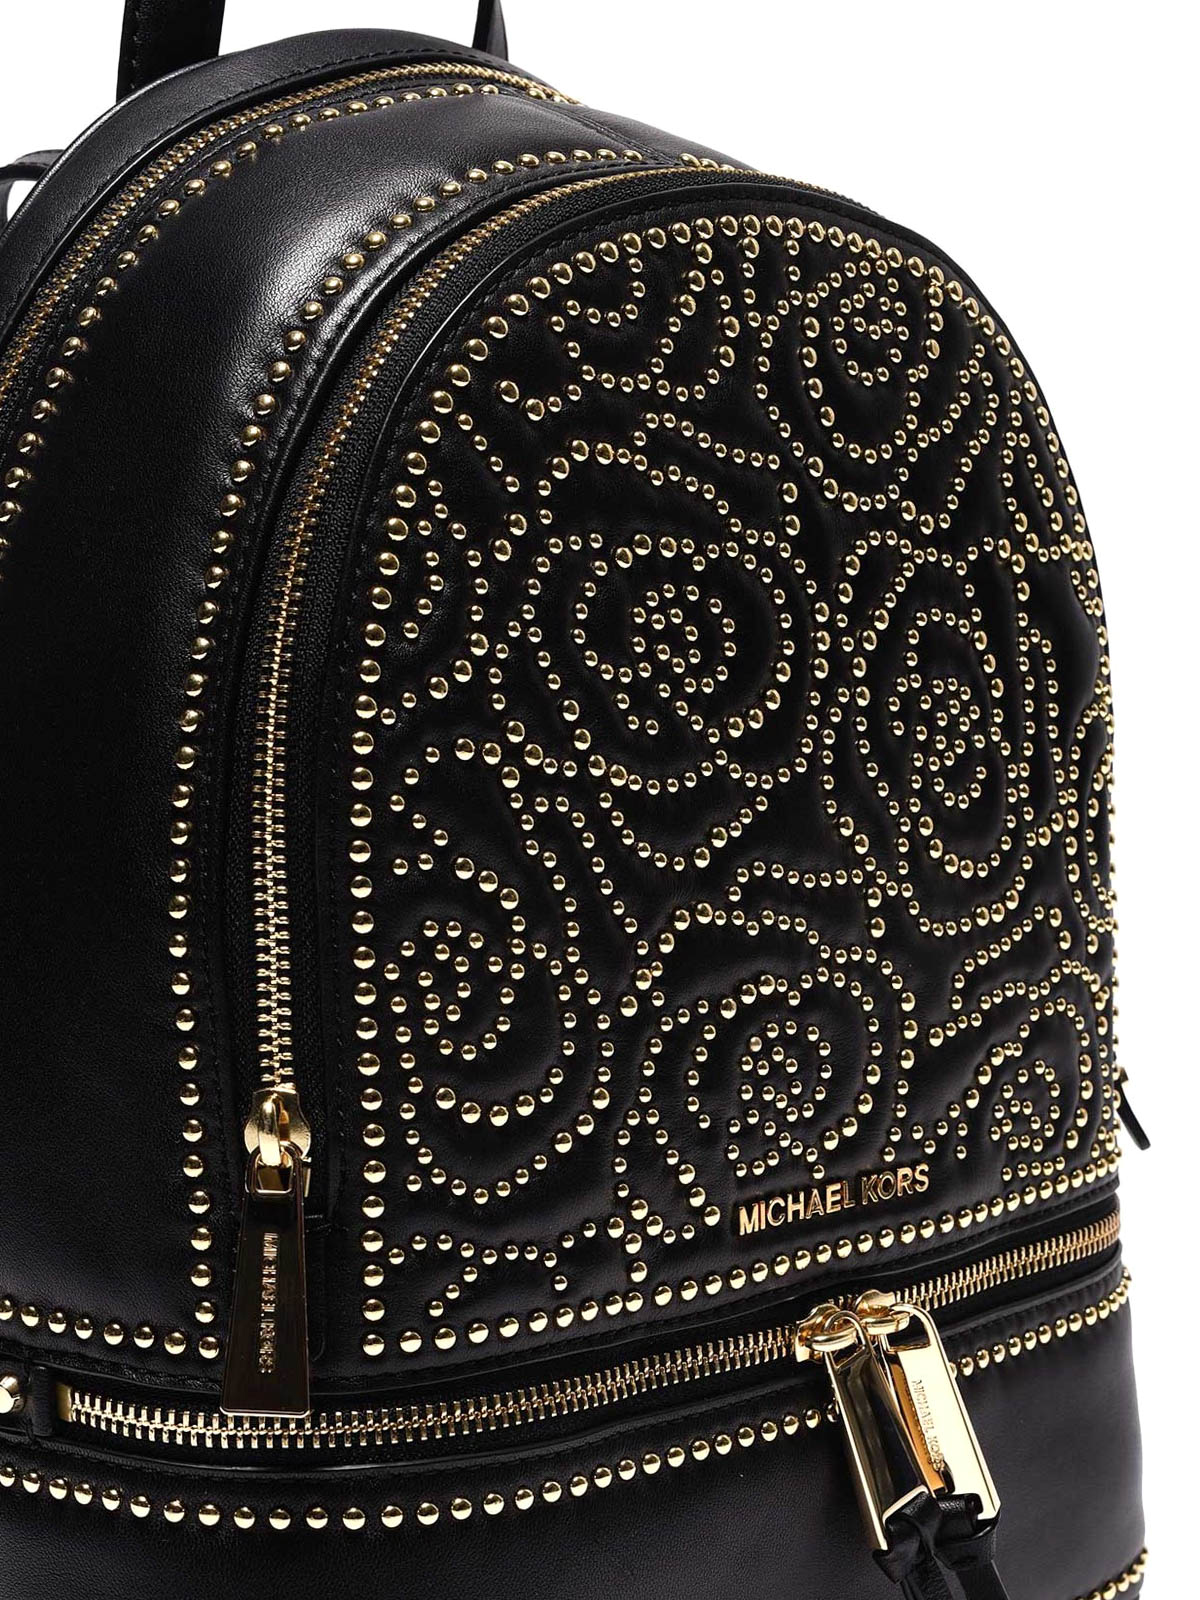 michael kors black and gold backpack